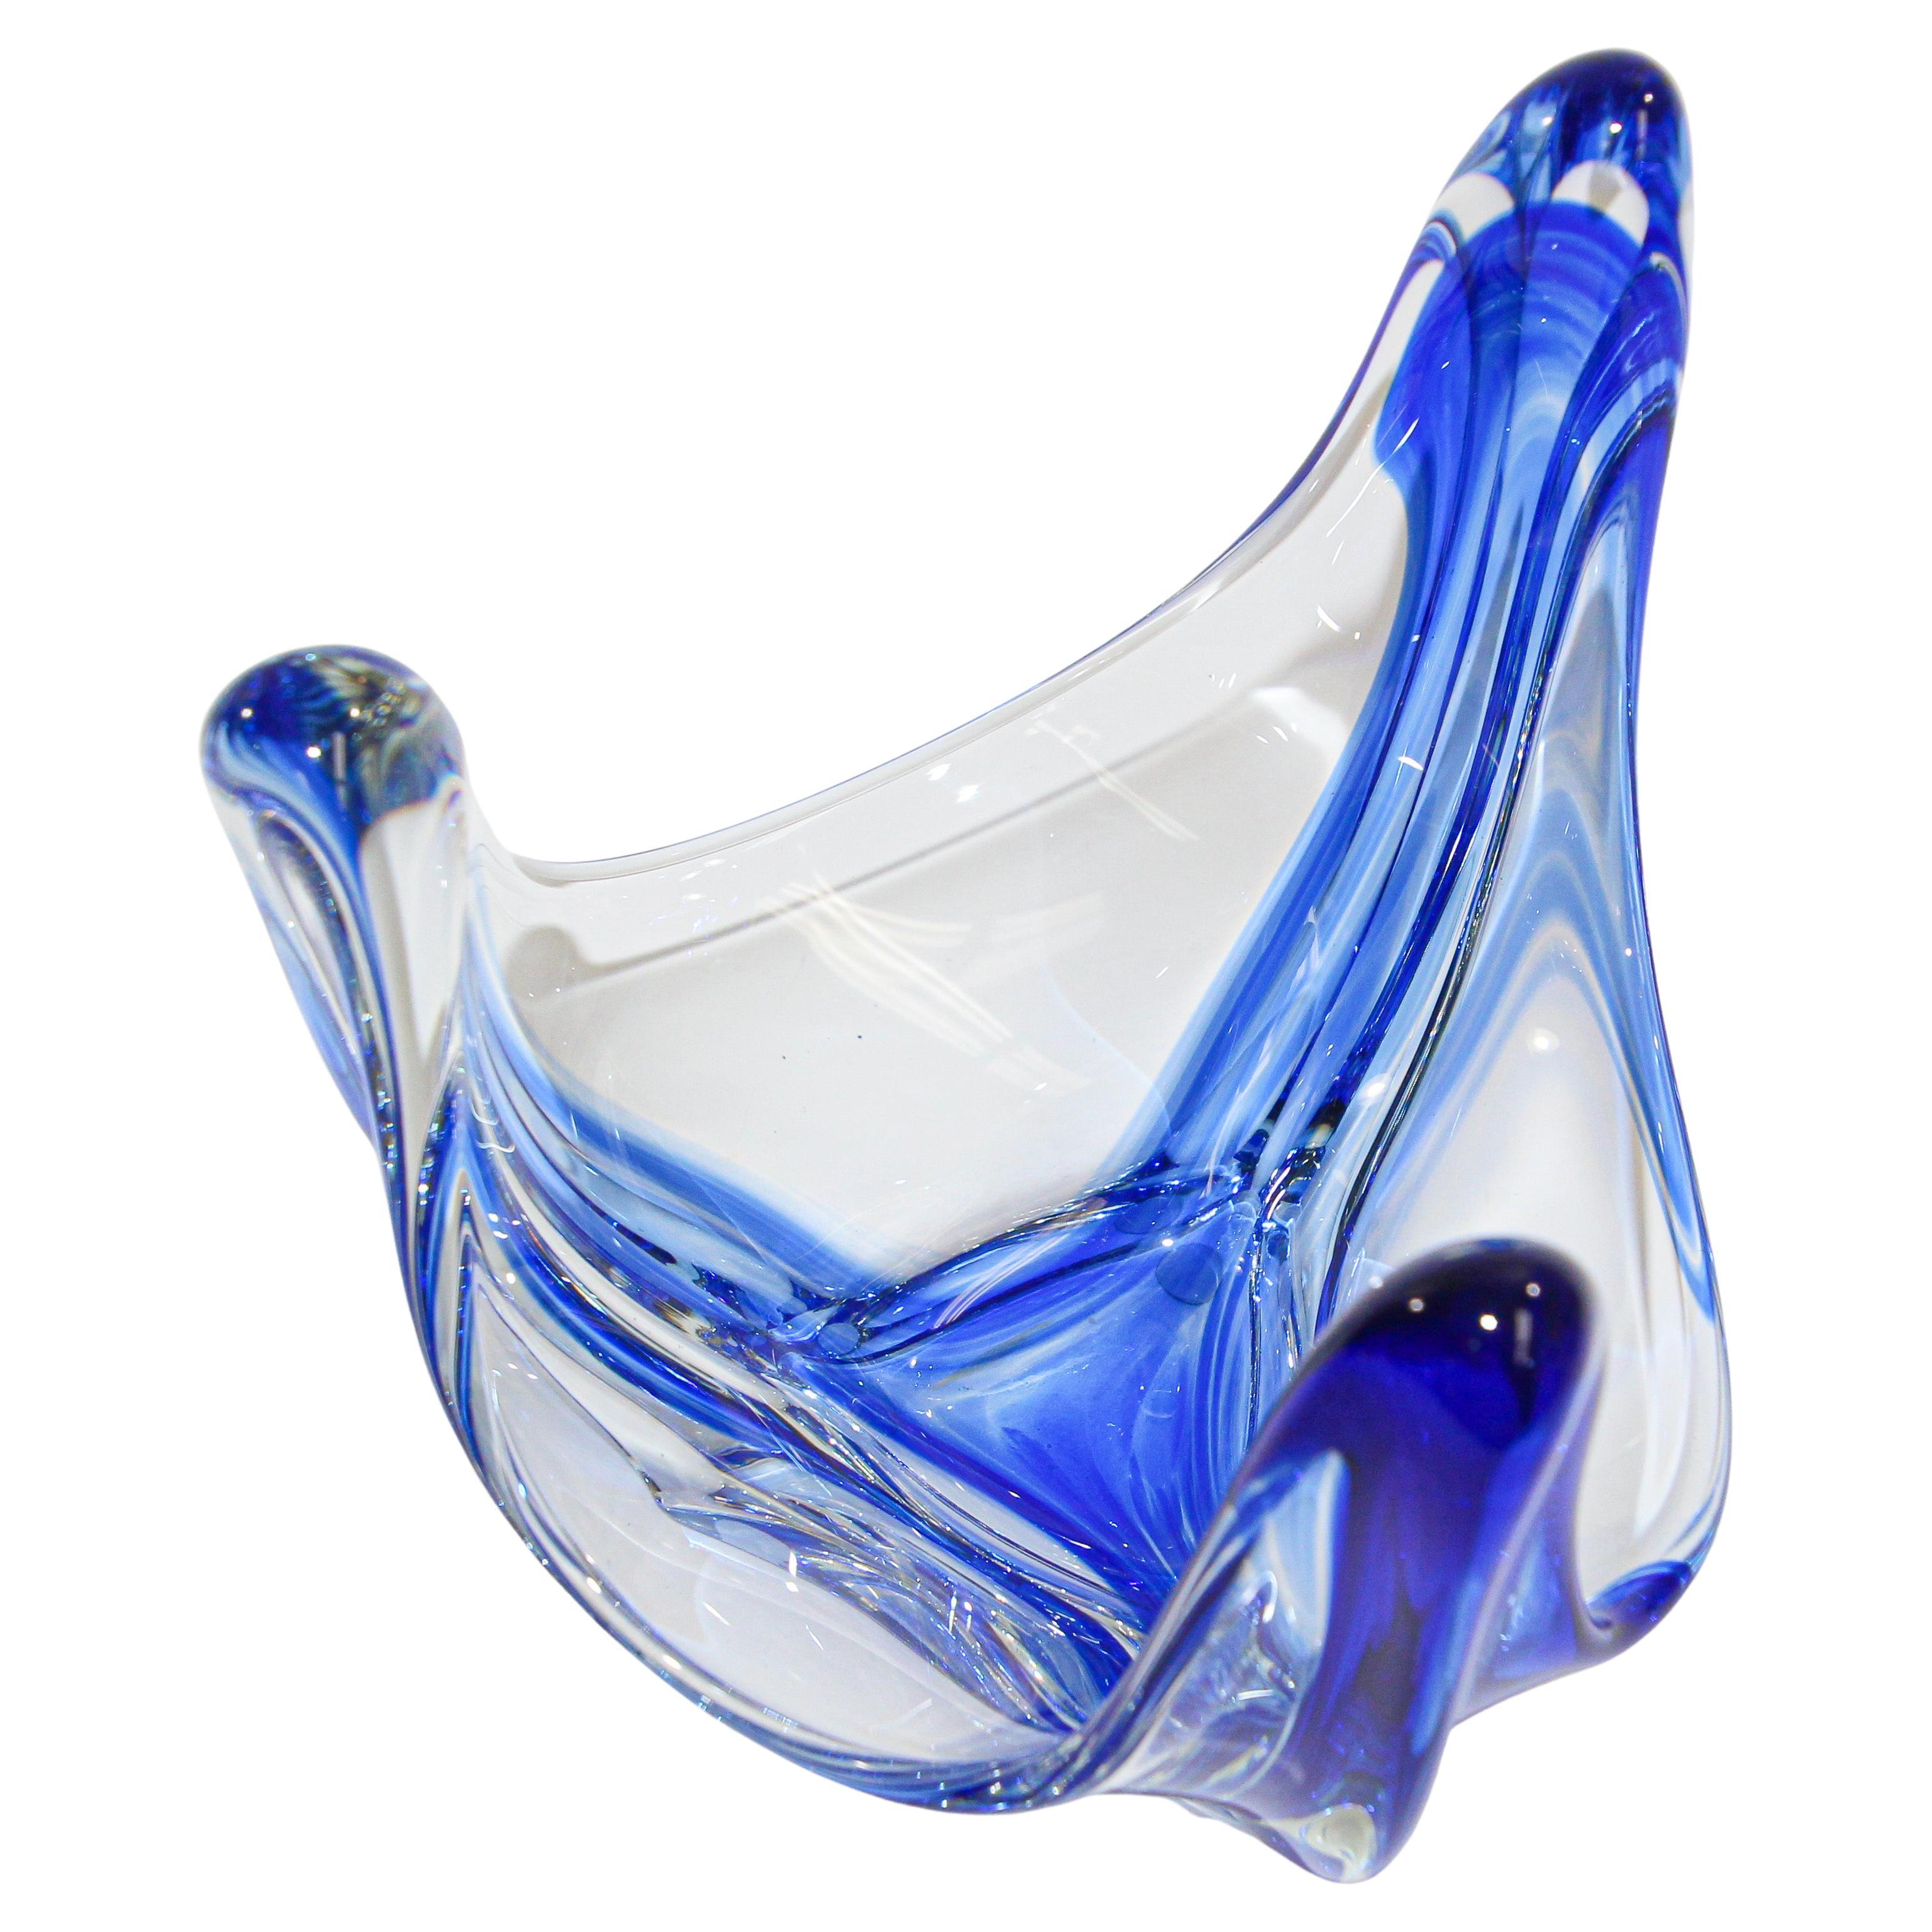 Large sculptural modern decorative hand blown Murano art glass bowl with a radiating stylized design in an amazing royal blue glass.
Beautiful Murano midcentury hand blown decorative bowl in a thick elongated shape handcrafted in Italy, circa